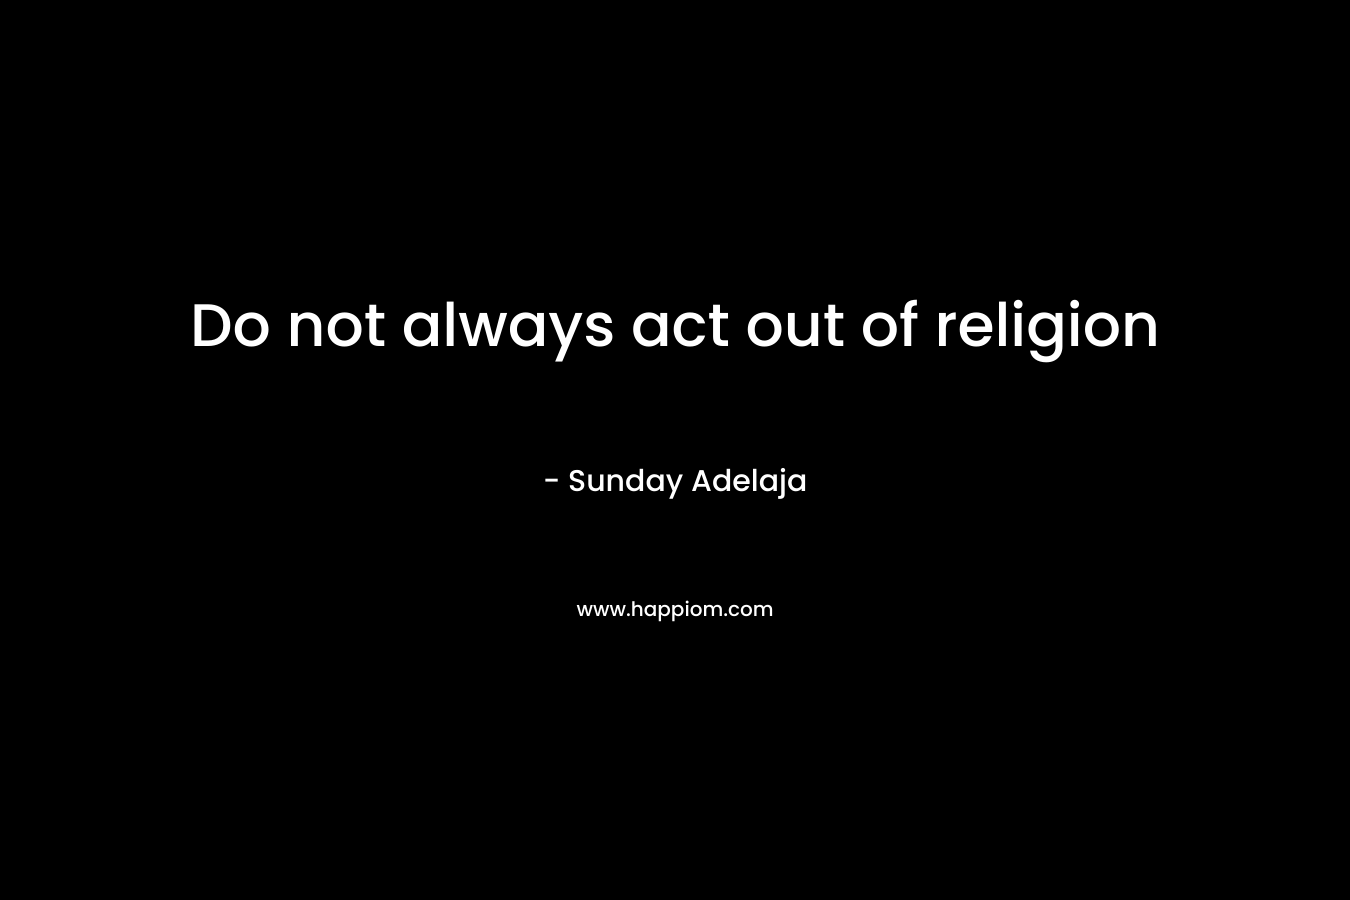 Do not always act out of religion